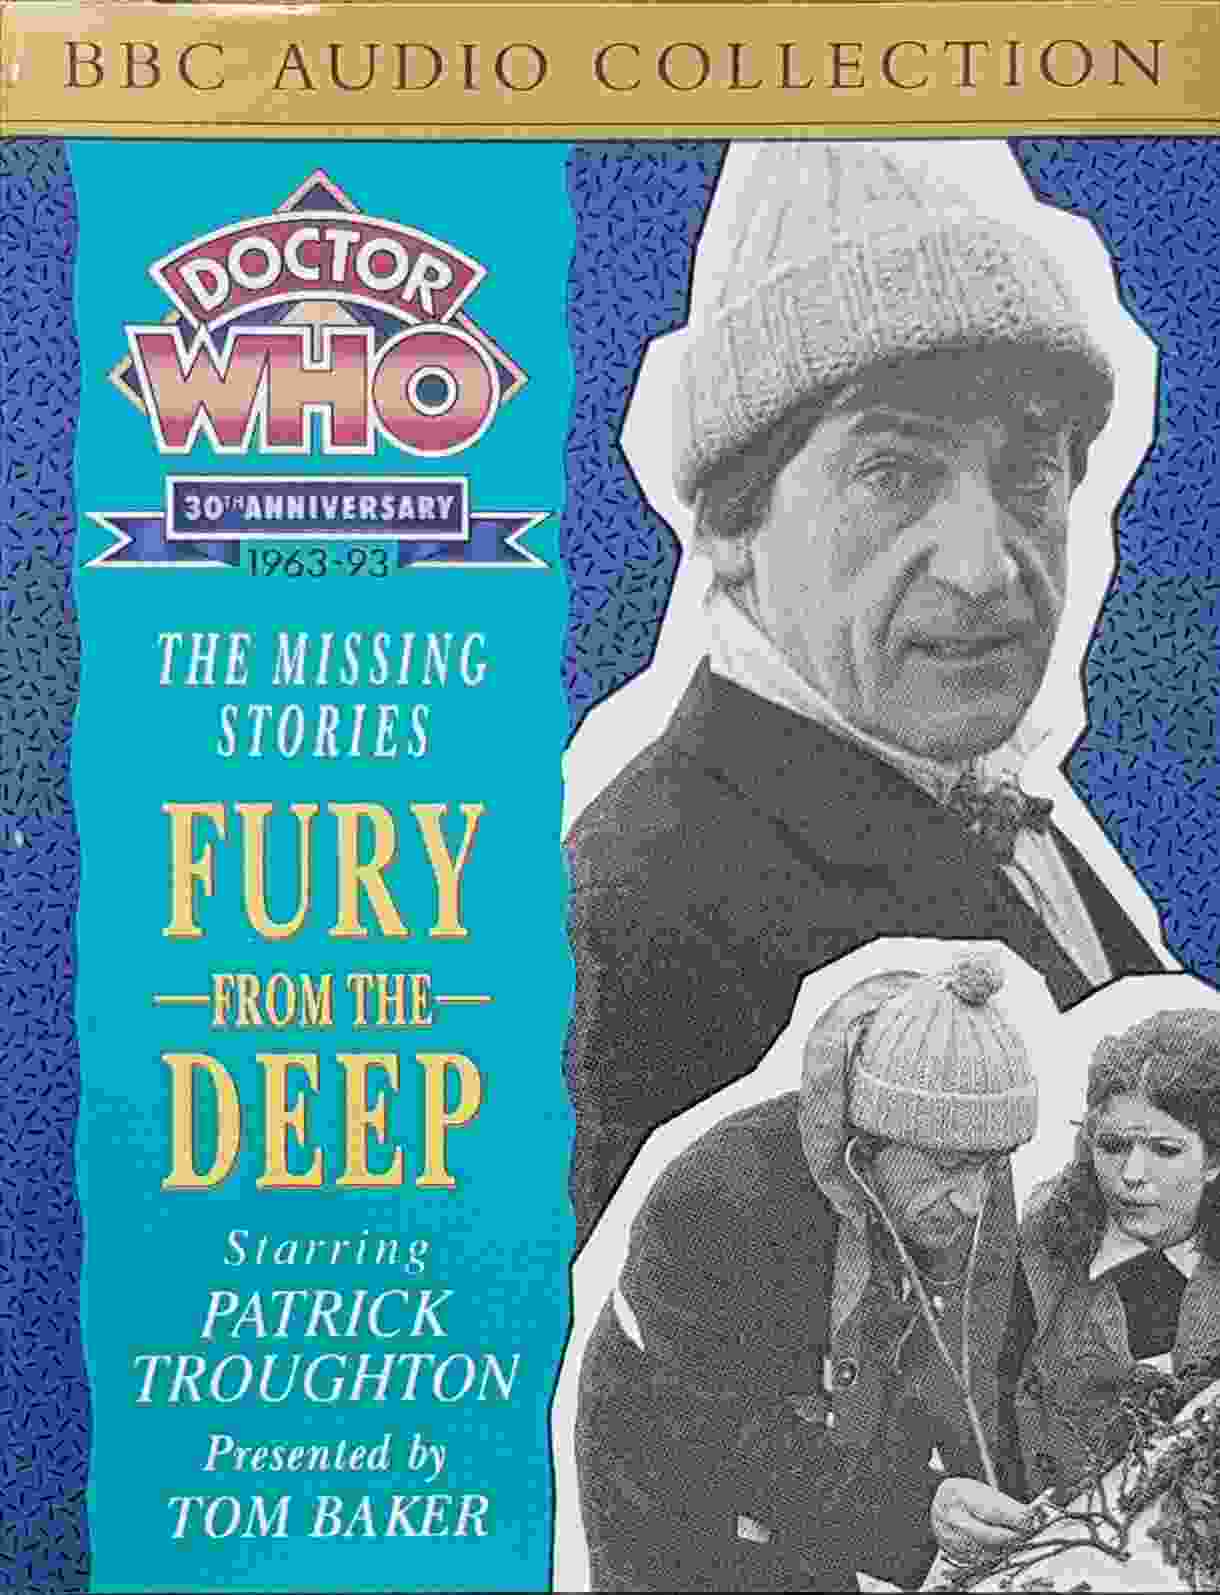 Picture of ZBBC 1434 Doctor Who - Fury from the deep by artist  from the BBC cassettes - Records and Tapes library